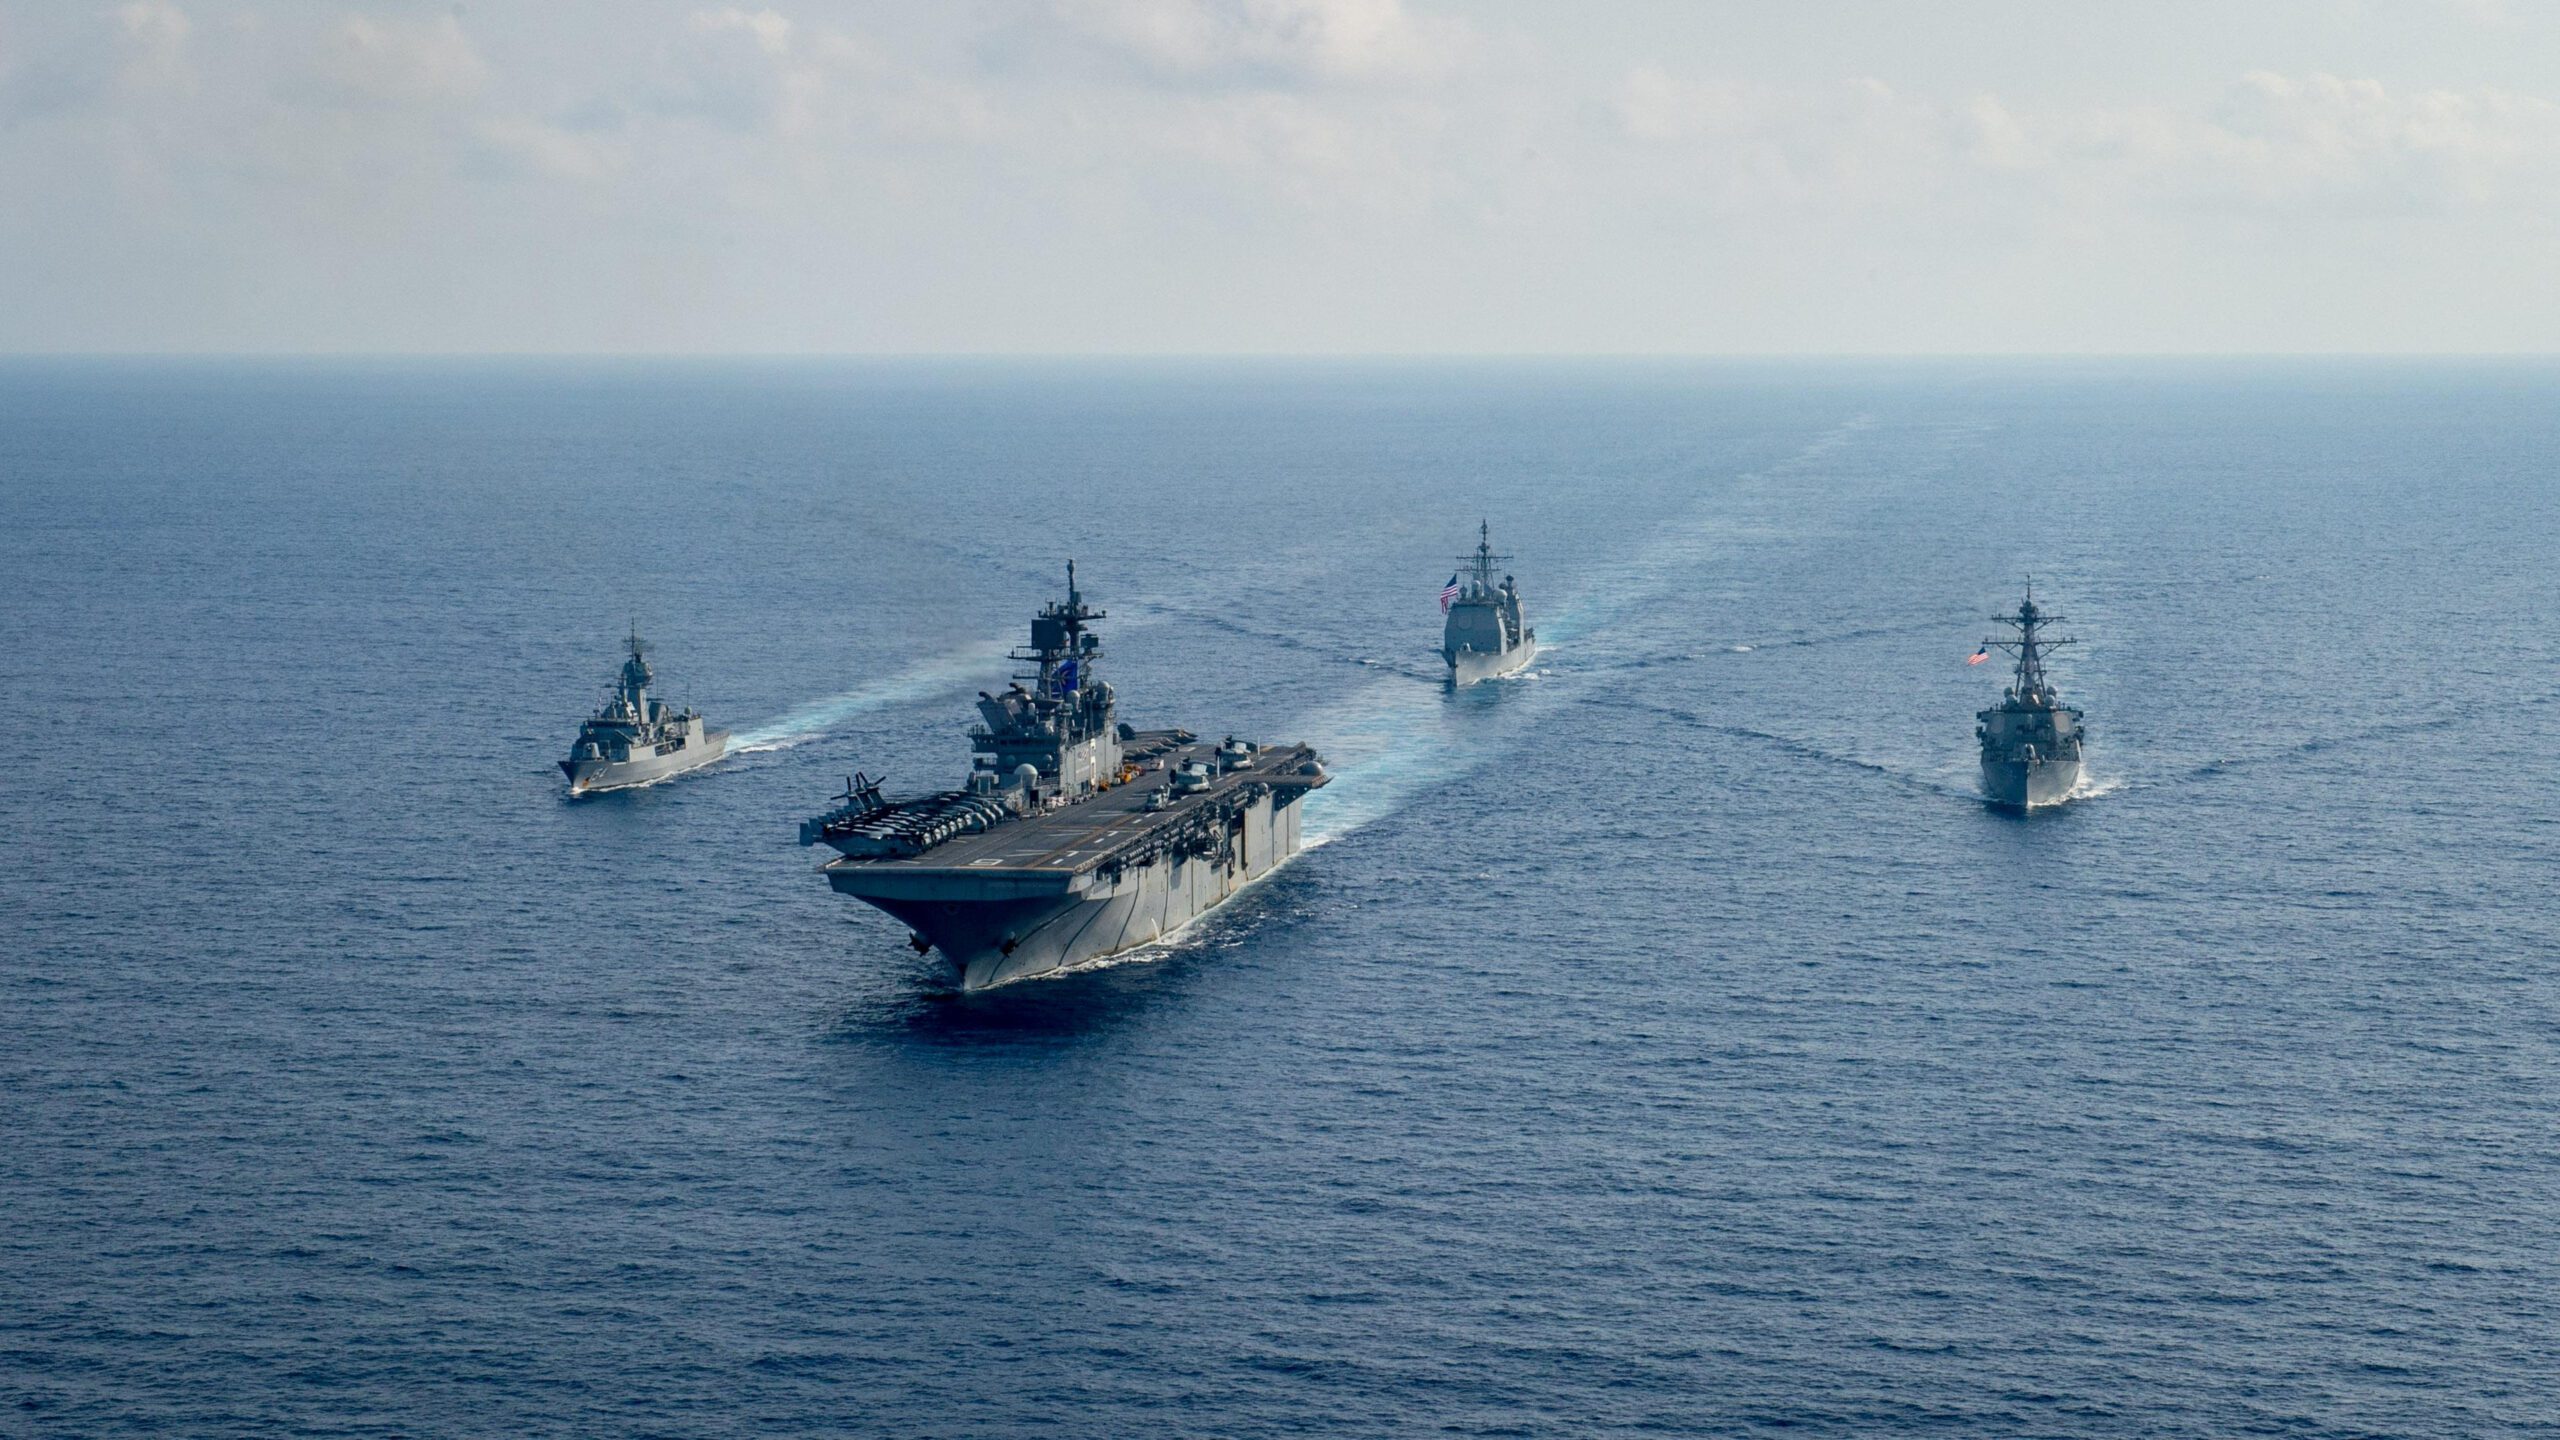 U.S. Navy and Royal Australian Navy team up in the South China Sea. Picture taken April 18, 2020. Petty Officer 3rd Class Nicholas Huynh/U.S. Navy/Handout via REUTERS